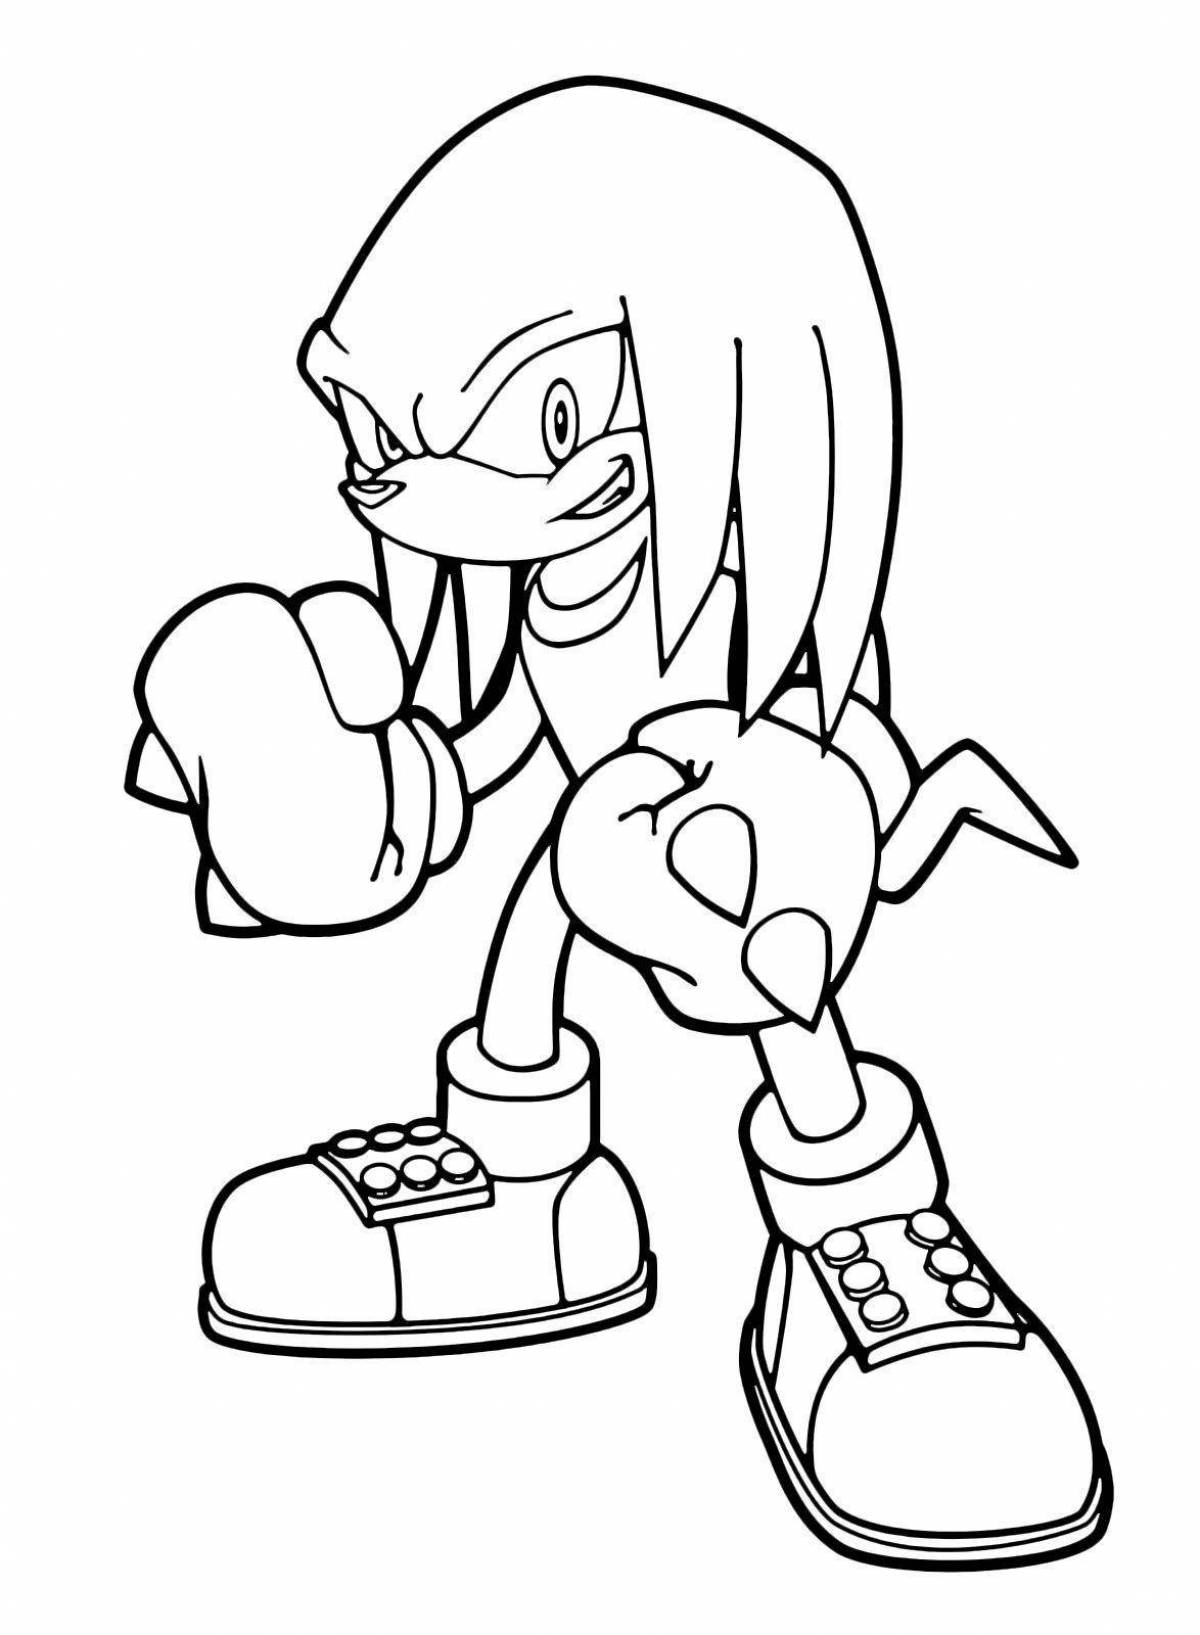 Sonic tails and knuckles dynamic coloring